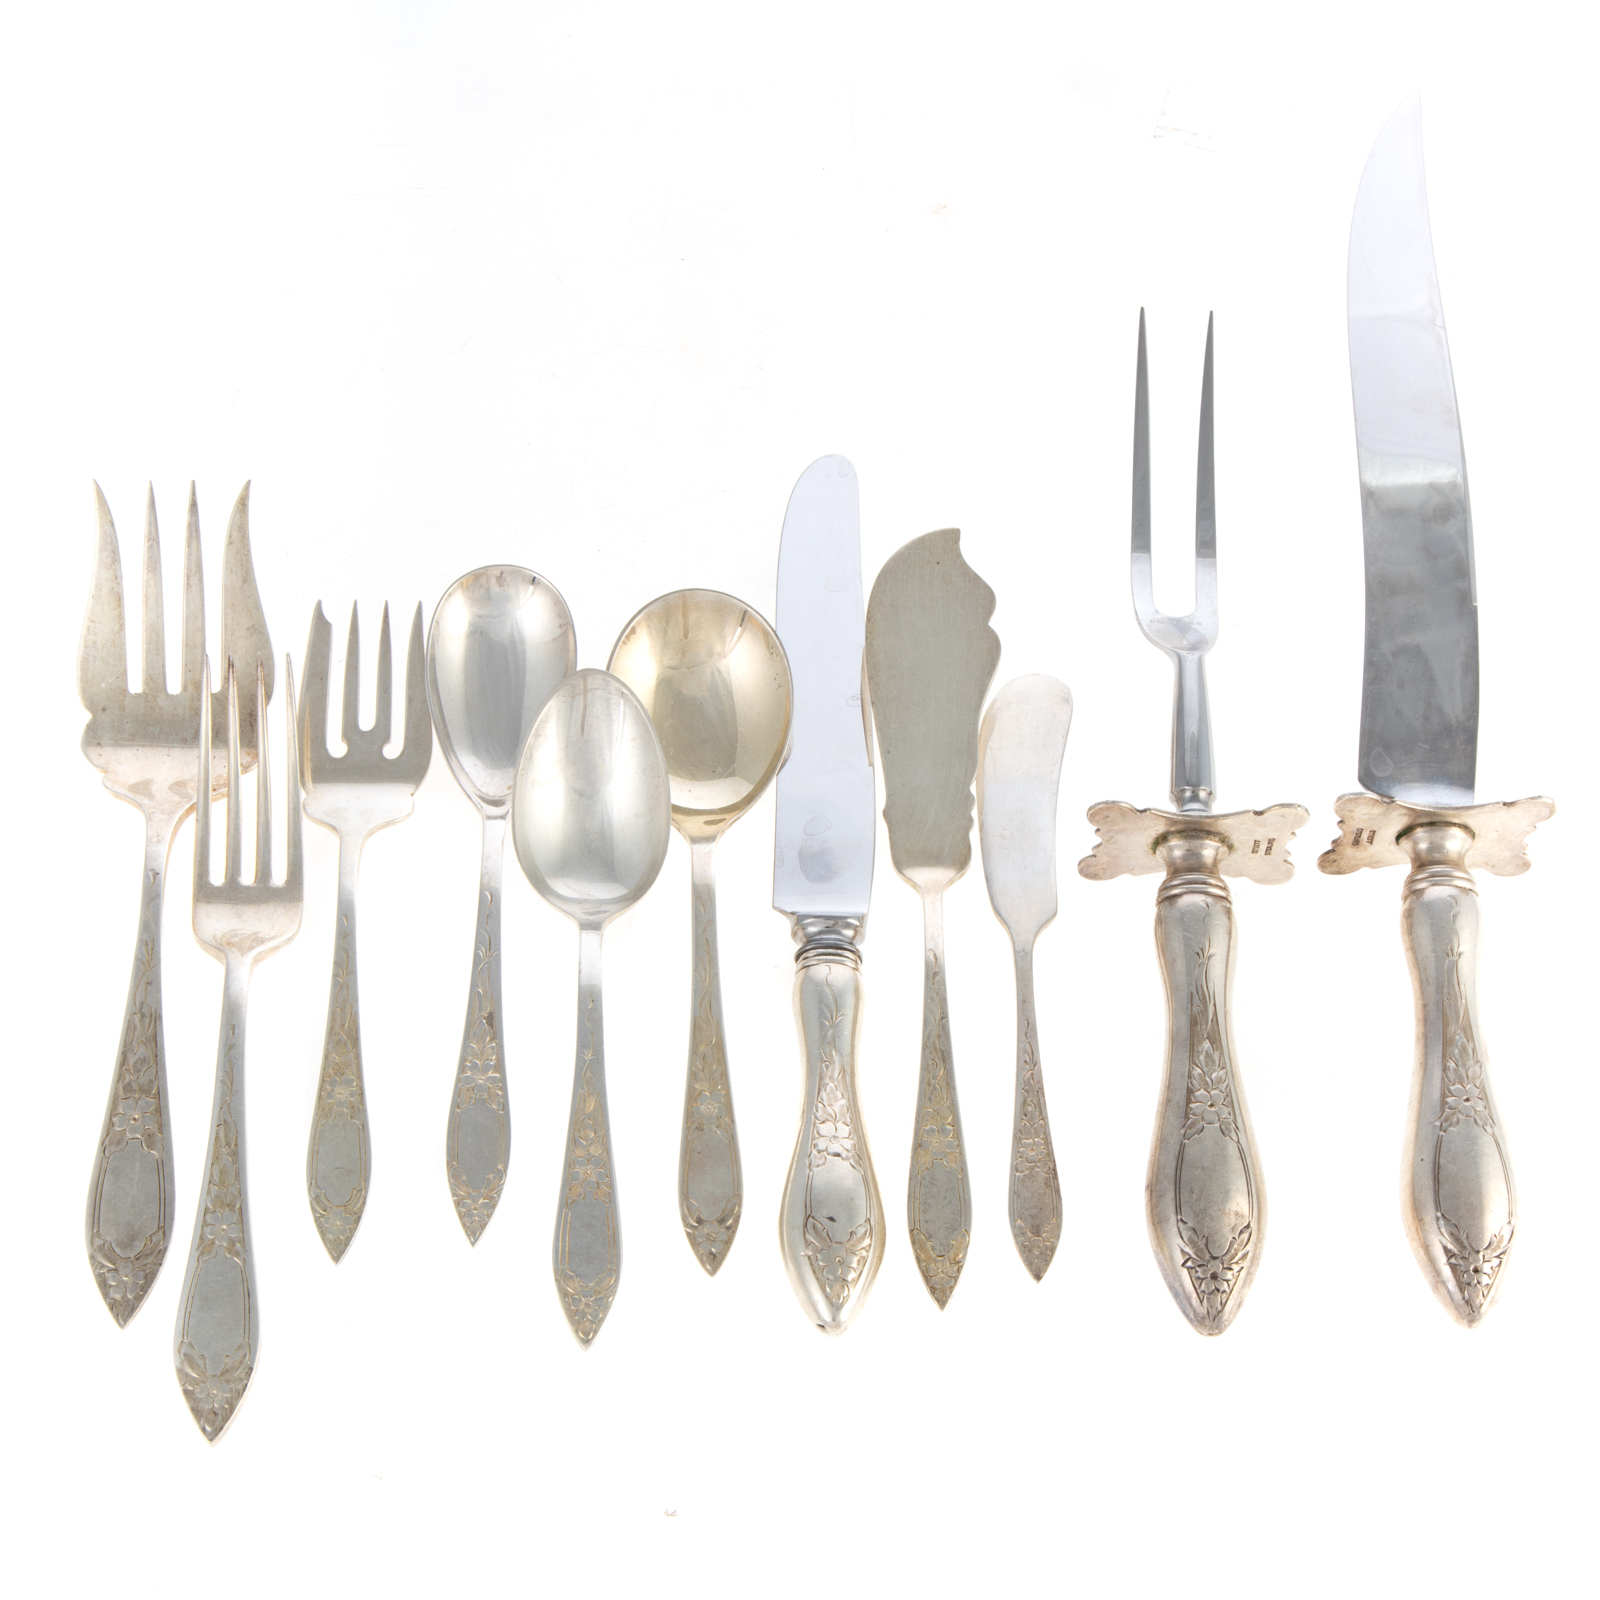 STIEFF STERLING "LADY CLAIRE" FLATWARE